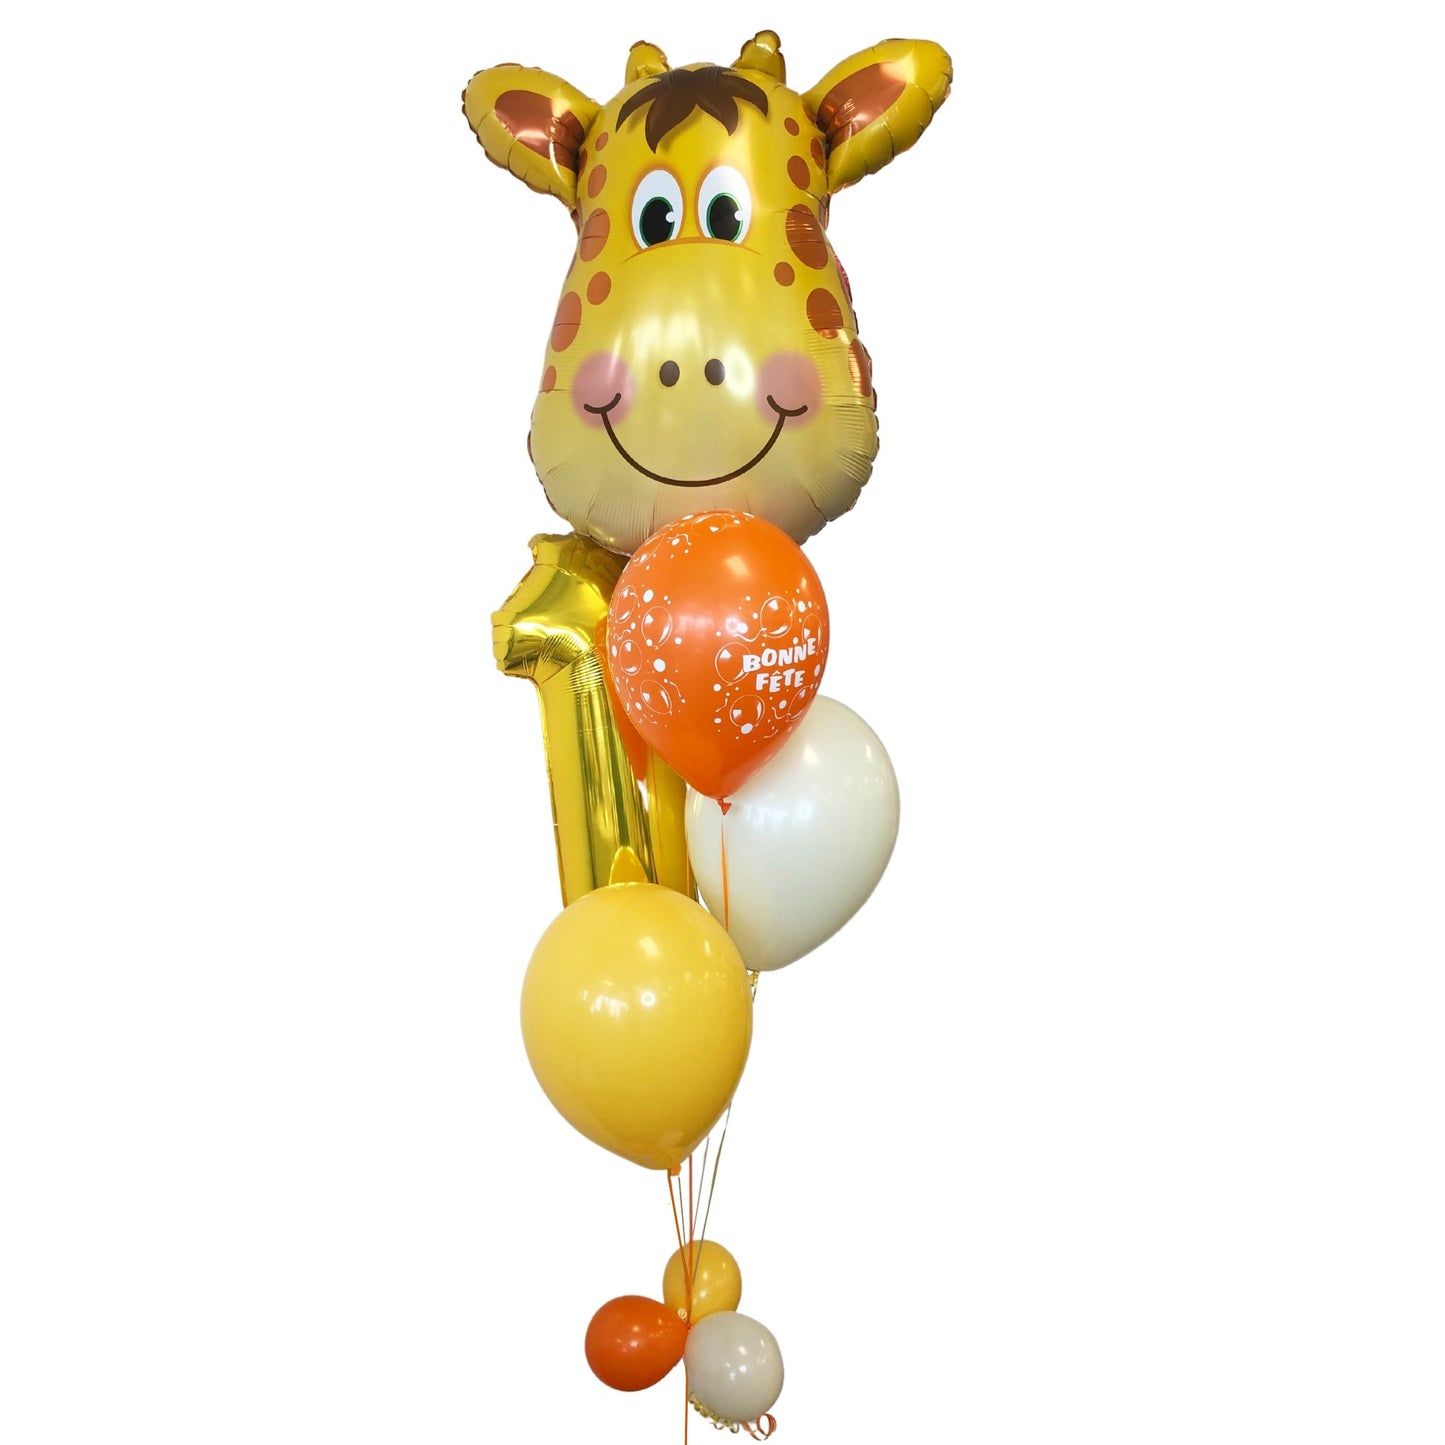 BOUQUET - AGE BALLOONS 26 IN. AND GIRAFFE 32 IN. 